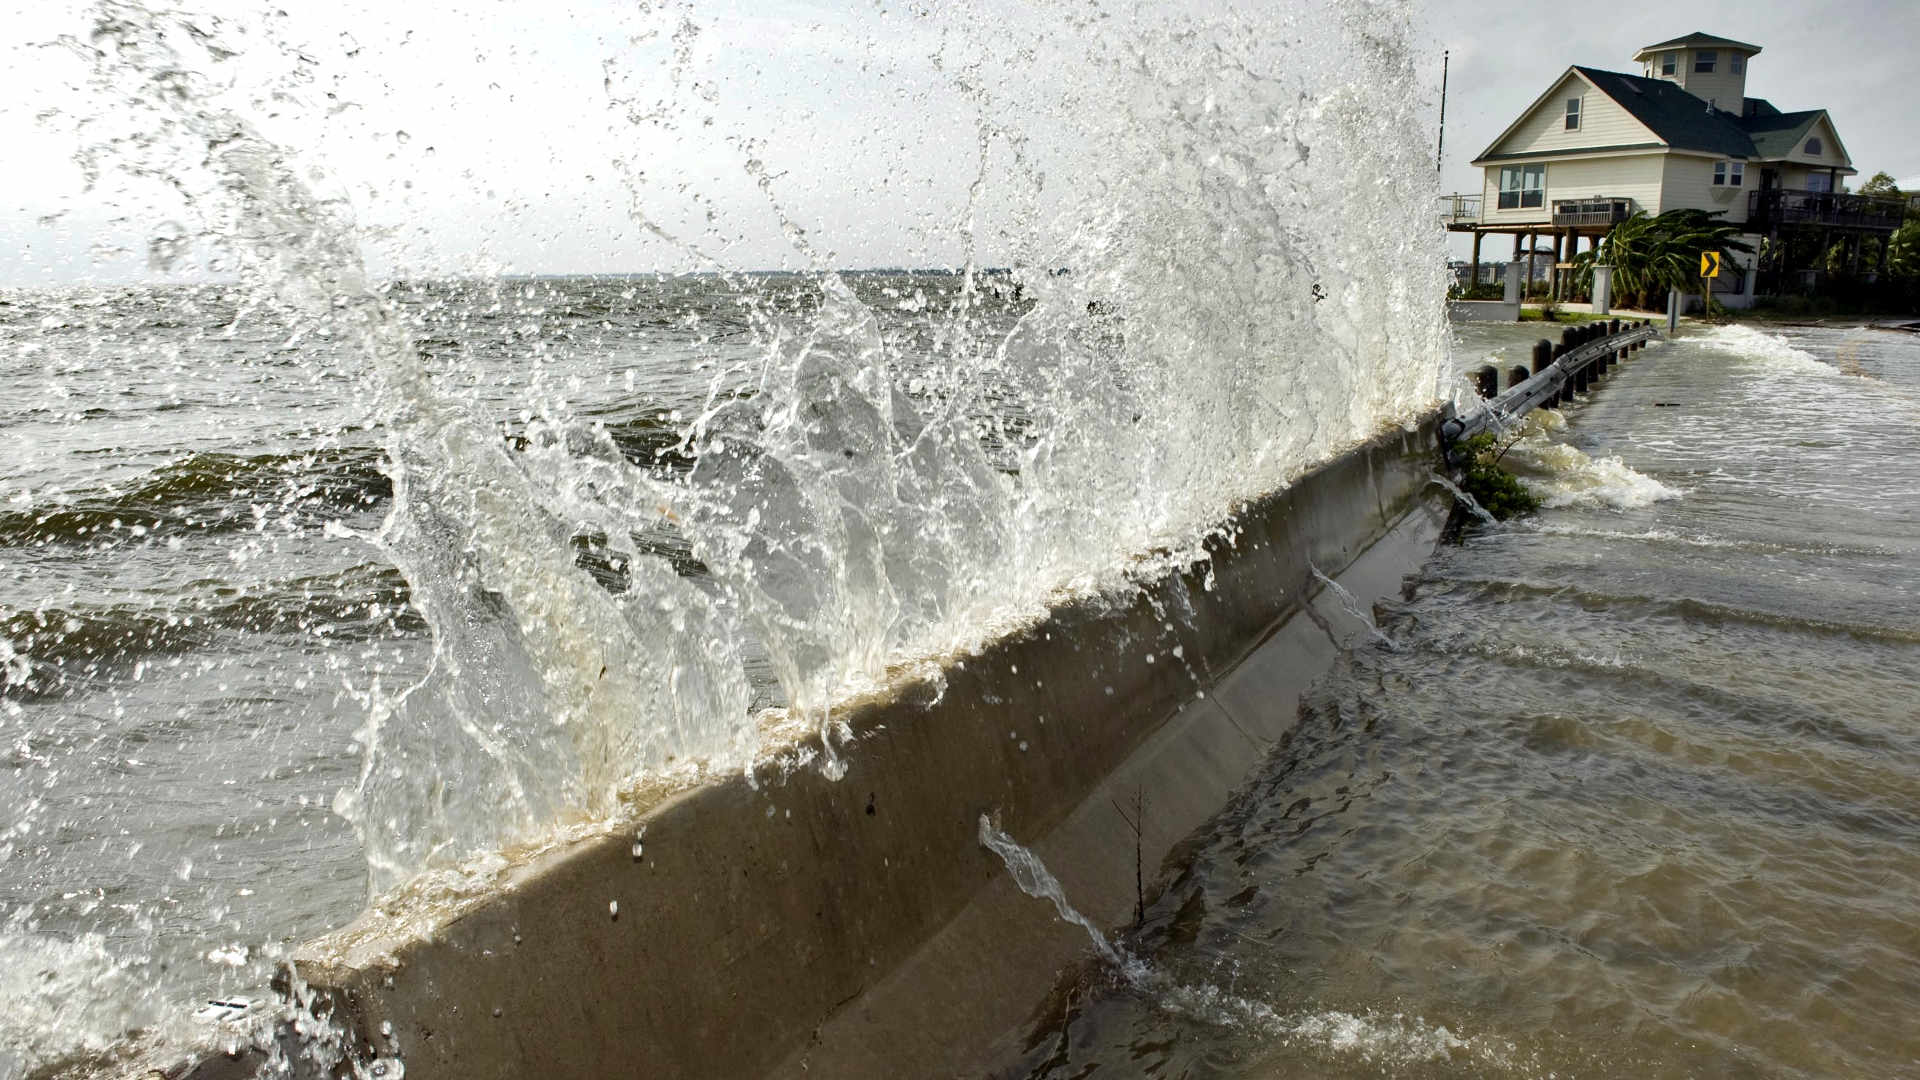 Water from Galveston Bay crashes over a barrier September 12, 2008 in Seabrook, Texas. When Hurricane Ike hit the next day, it caused massive flooding and wiped out some 3,600 homes.